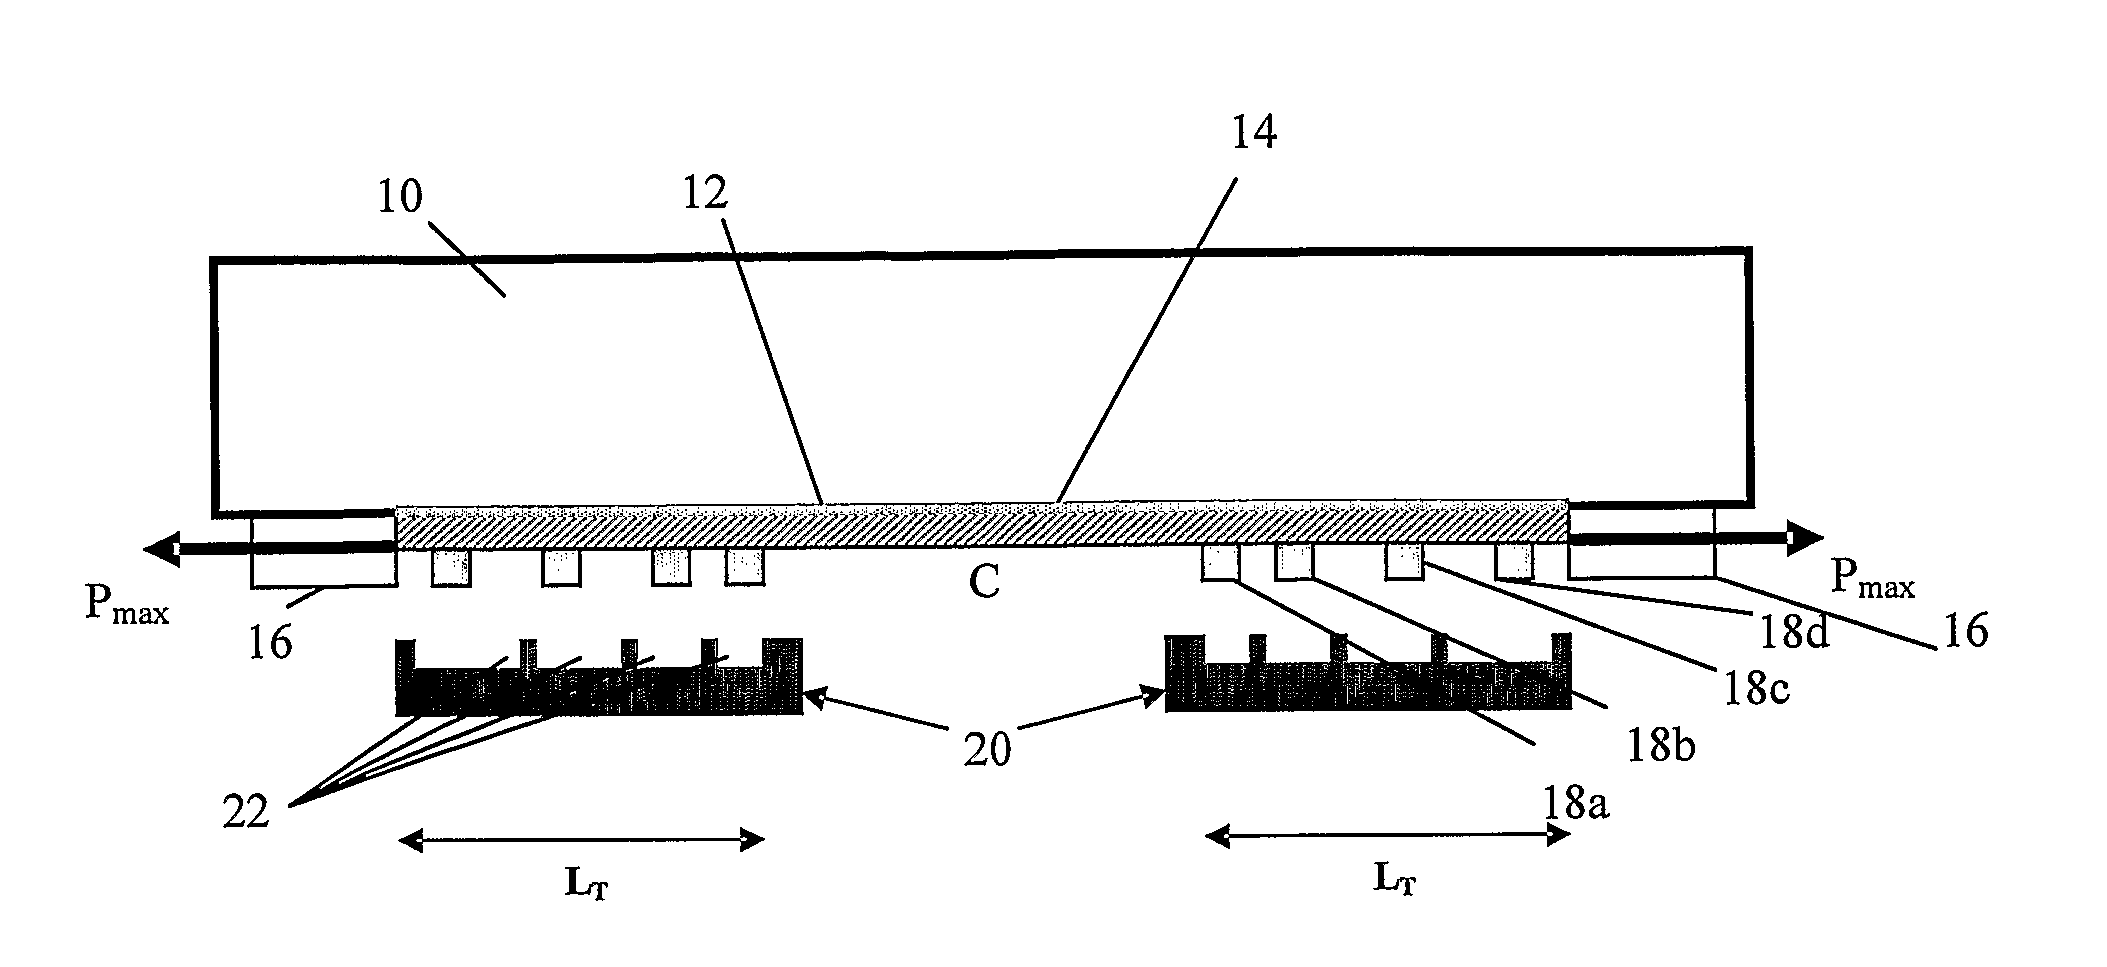 Method for applying a reinforced composite material to a structural member